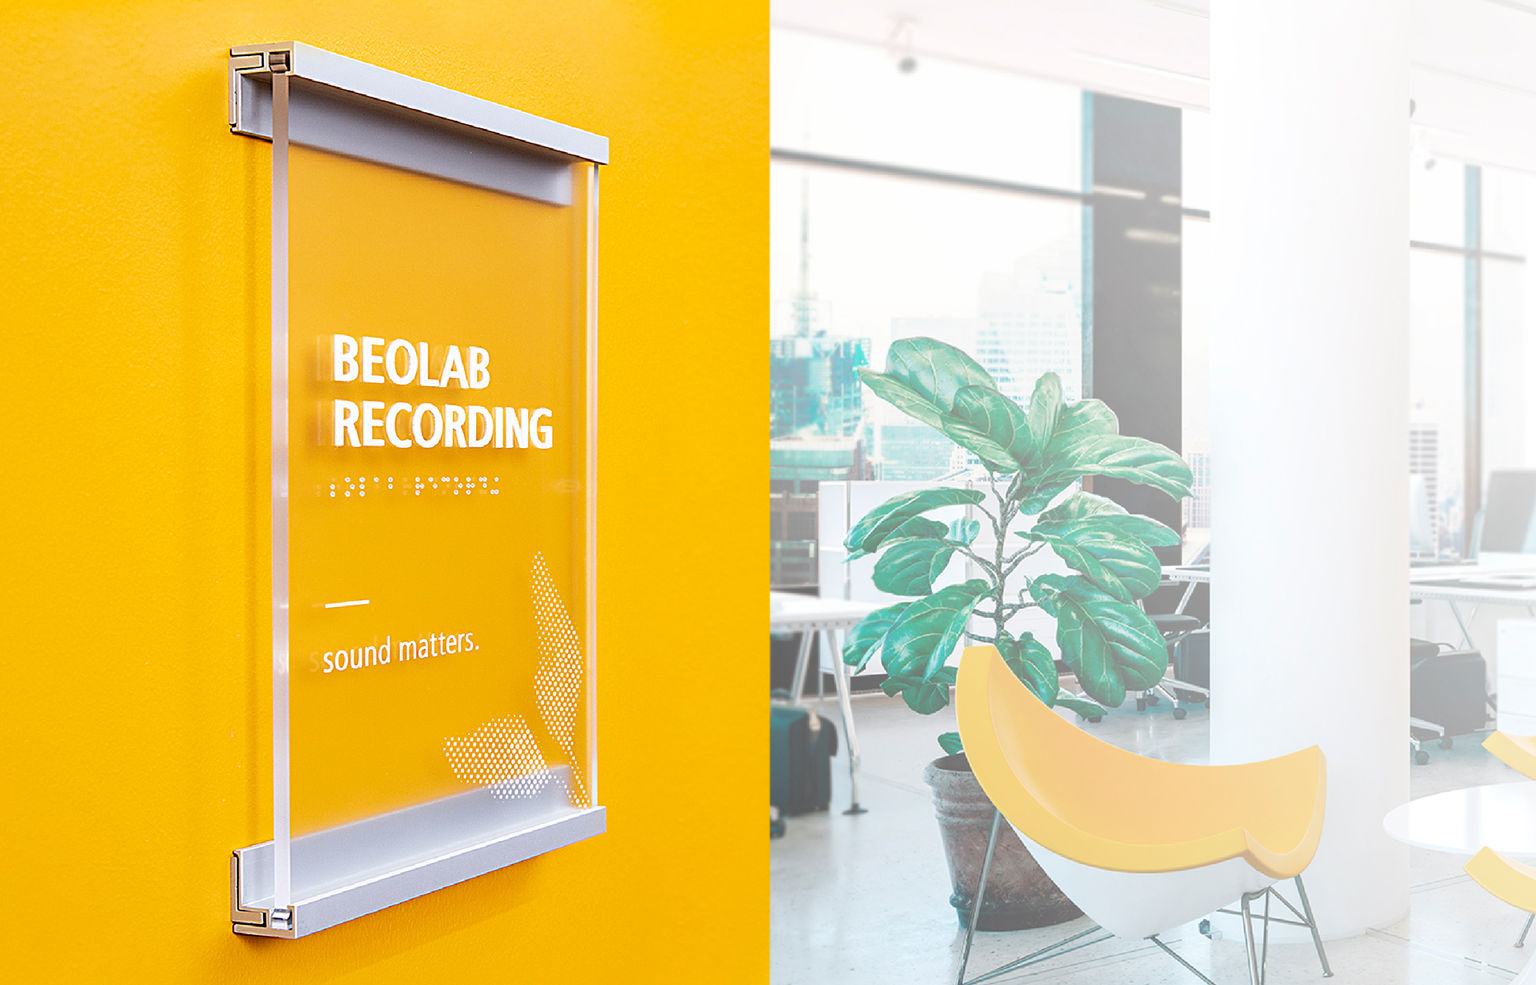 An ADA-compliant minimalist metal and glass-look recording studio room sign on a vibrant orange wall; a modernist lounge is visible in the background.